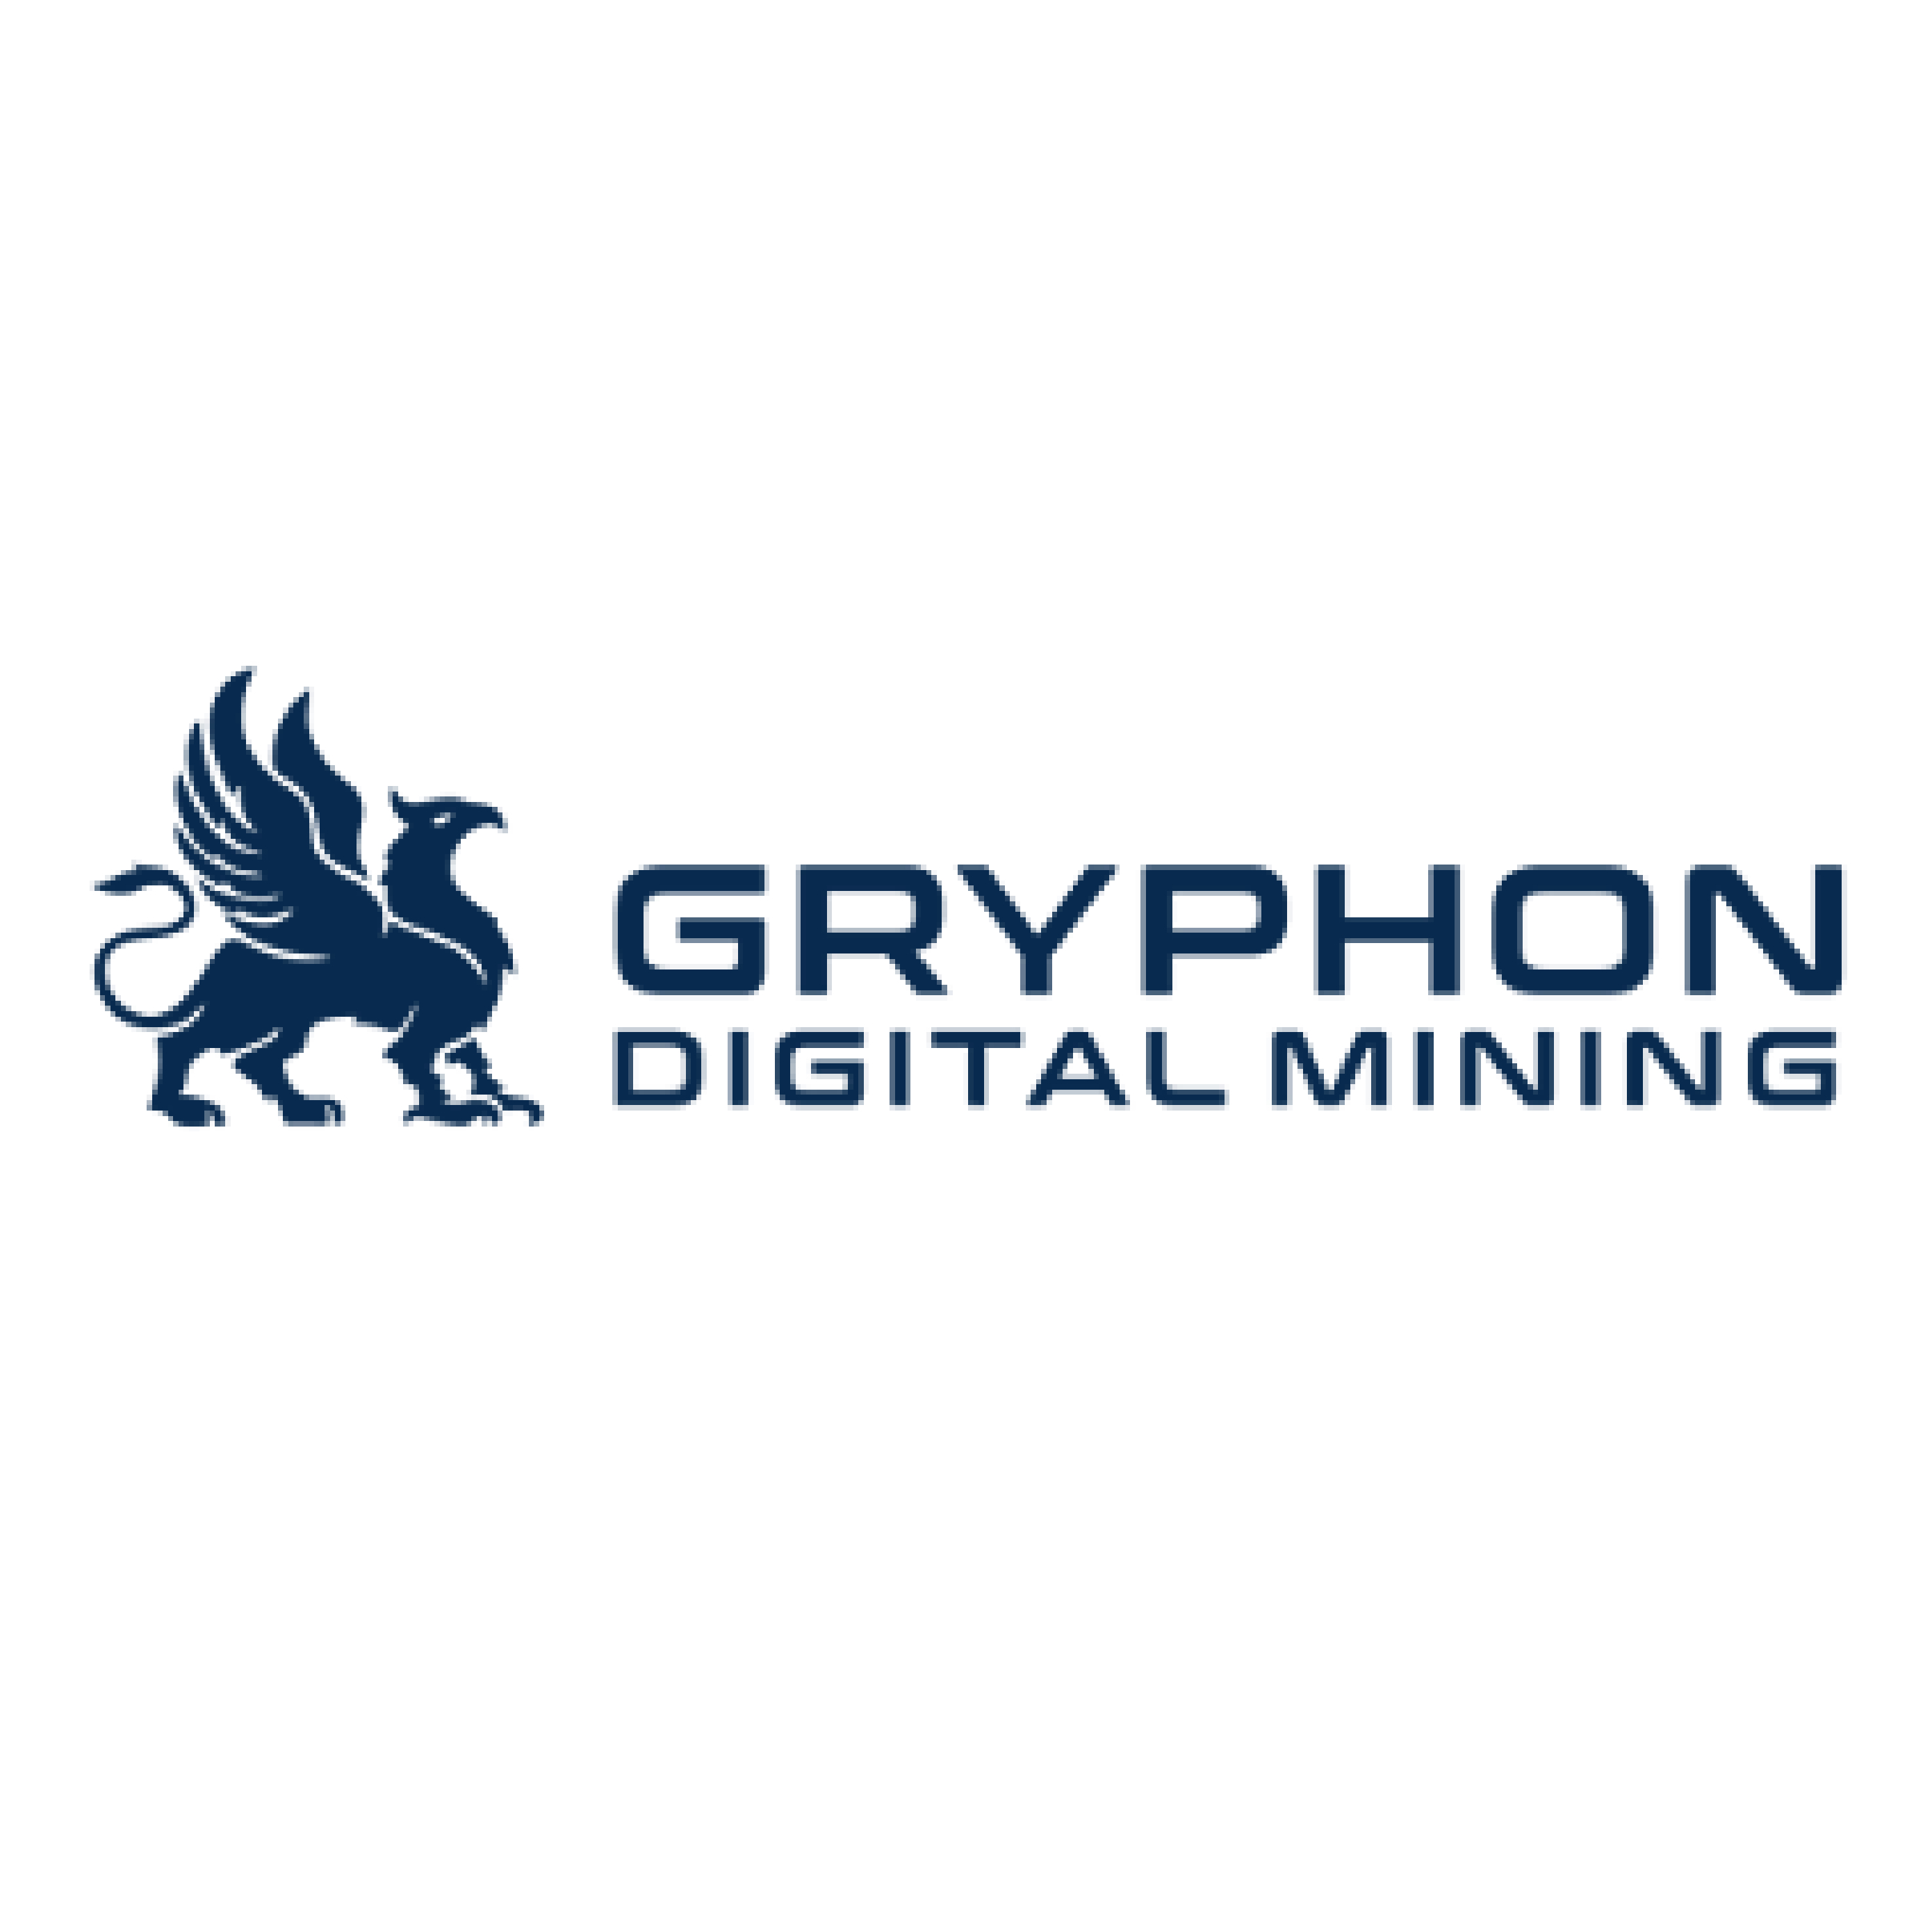 Gryphon Digital mining ends merger with Sphere 3D